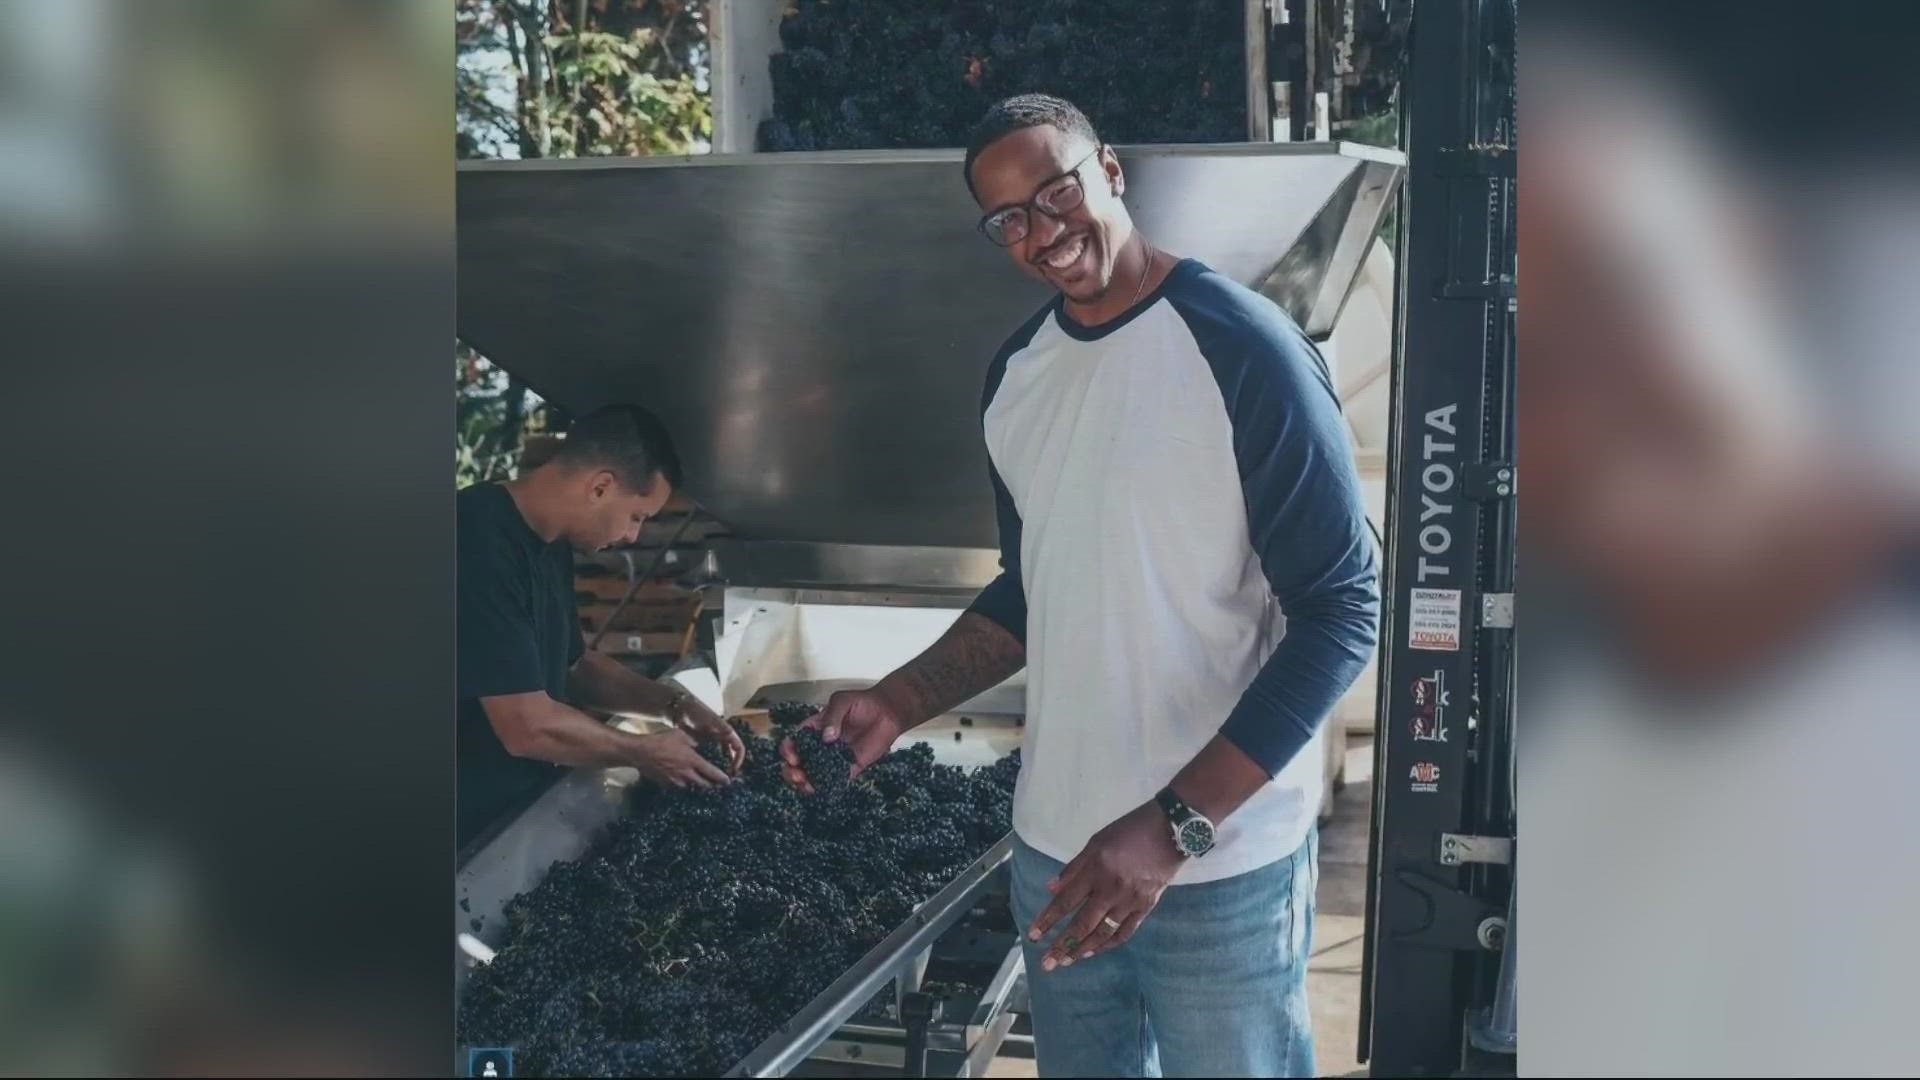 Channing Frye and his wine label, Chosen Family, will host a fundraiser on Feb. 11 to benefit a nonprofit that helps people of color break into the wine industry.